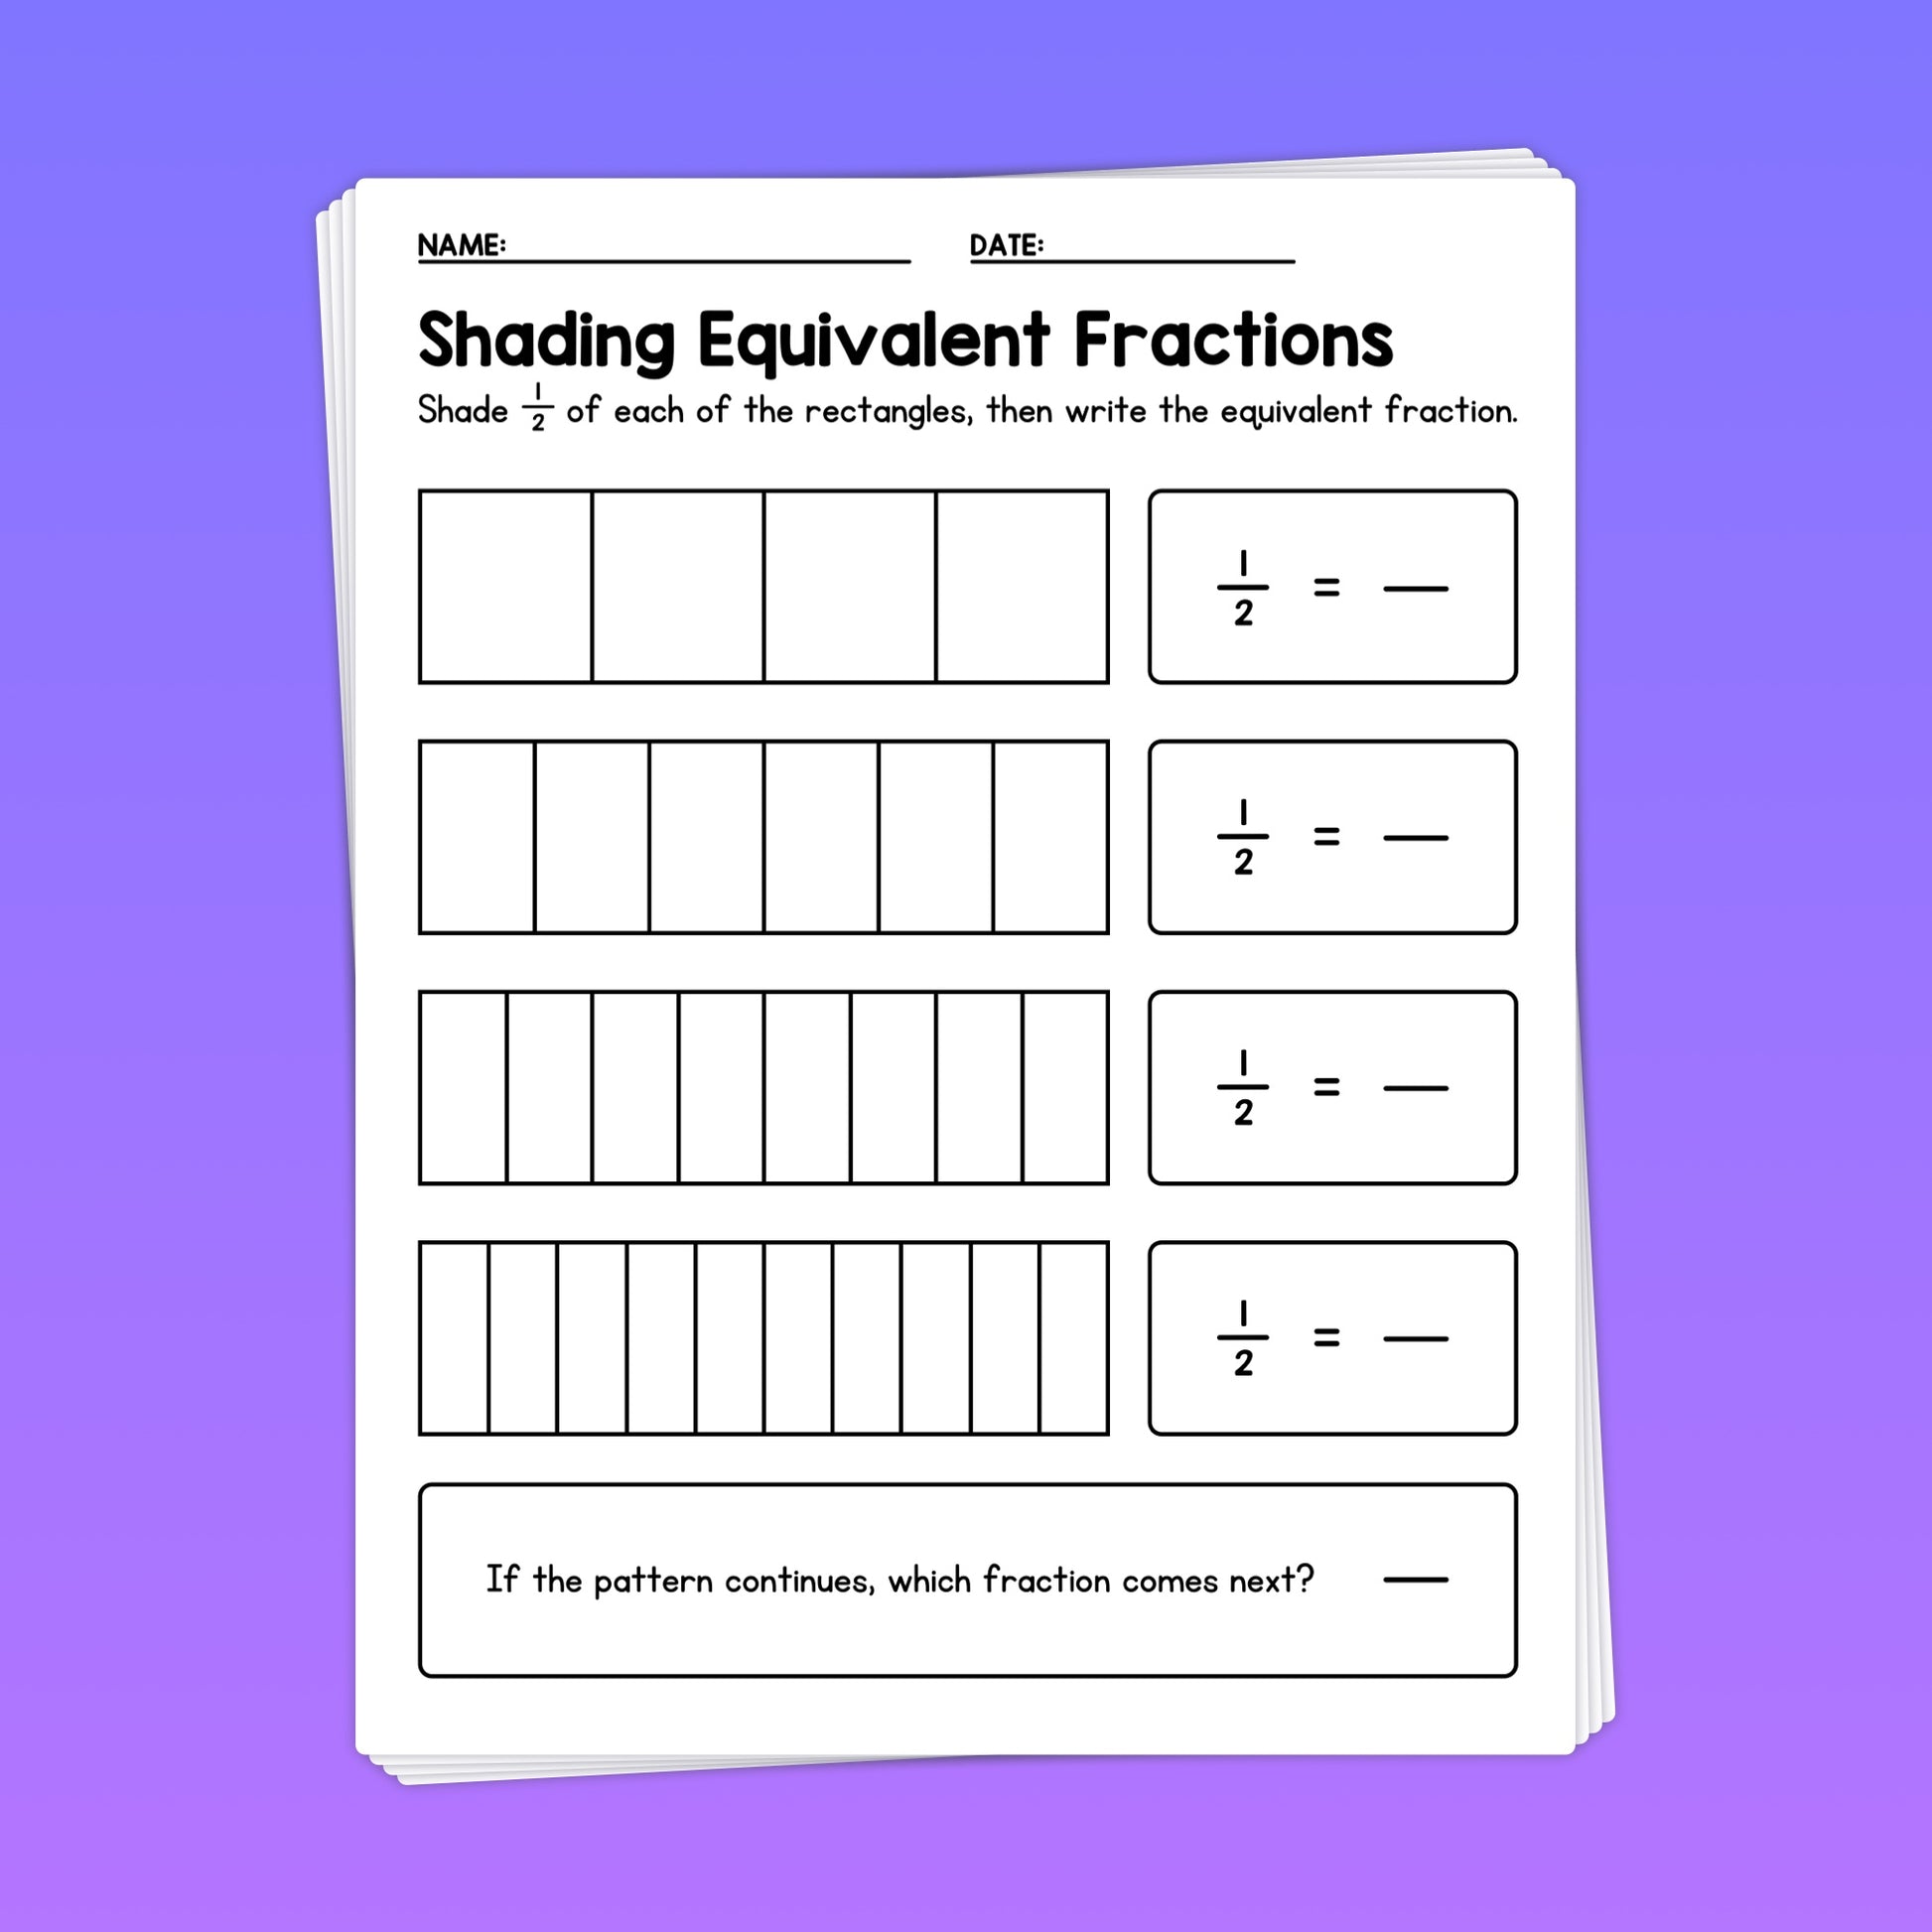 Shading equivalent fractions worksheets